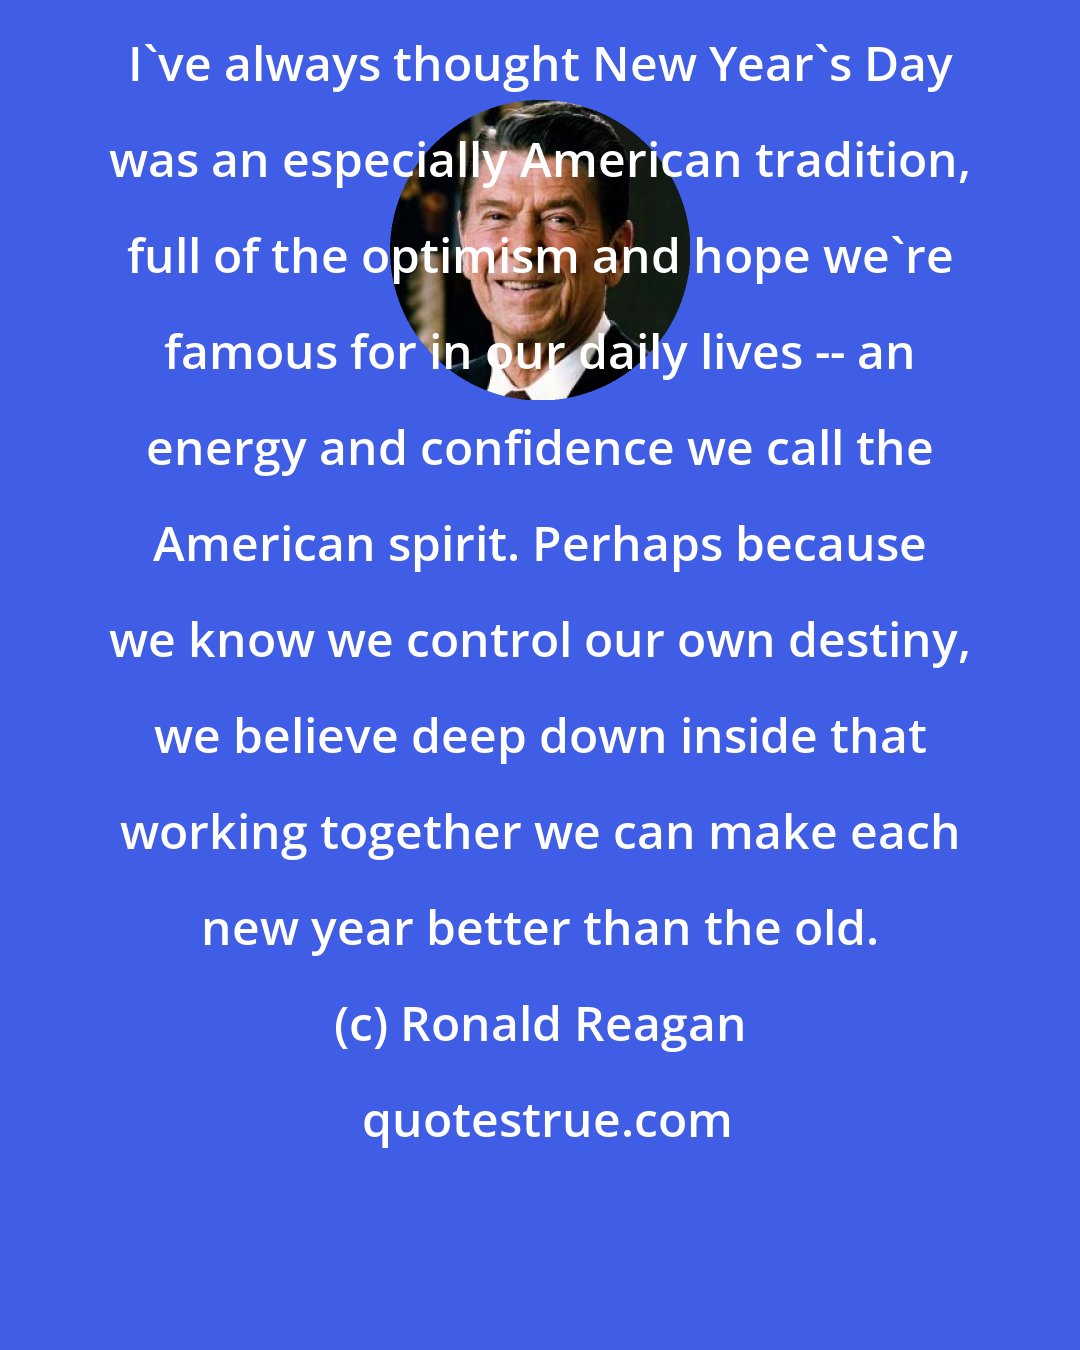 Ronald Reagan: I've always thought New Year's Day was an especially American tradition, full of the optimism and hope we're famous for in our daily lives -- an energy and confidence we call the American spirit. Perhaps because we know we control our own destiny, we believe deep down inside that working together we can make each new year better than the old.